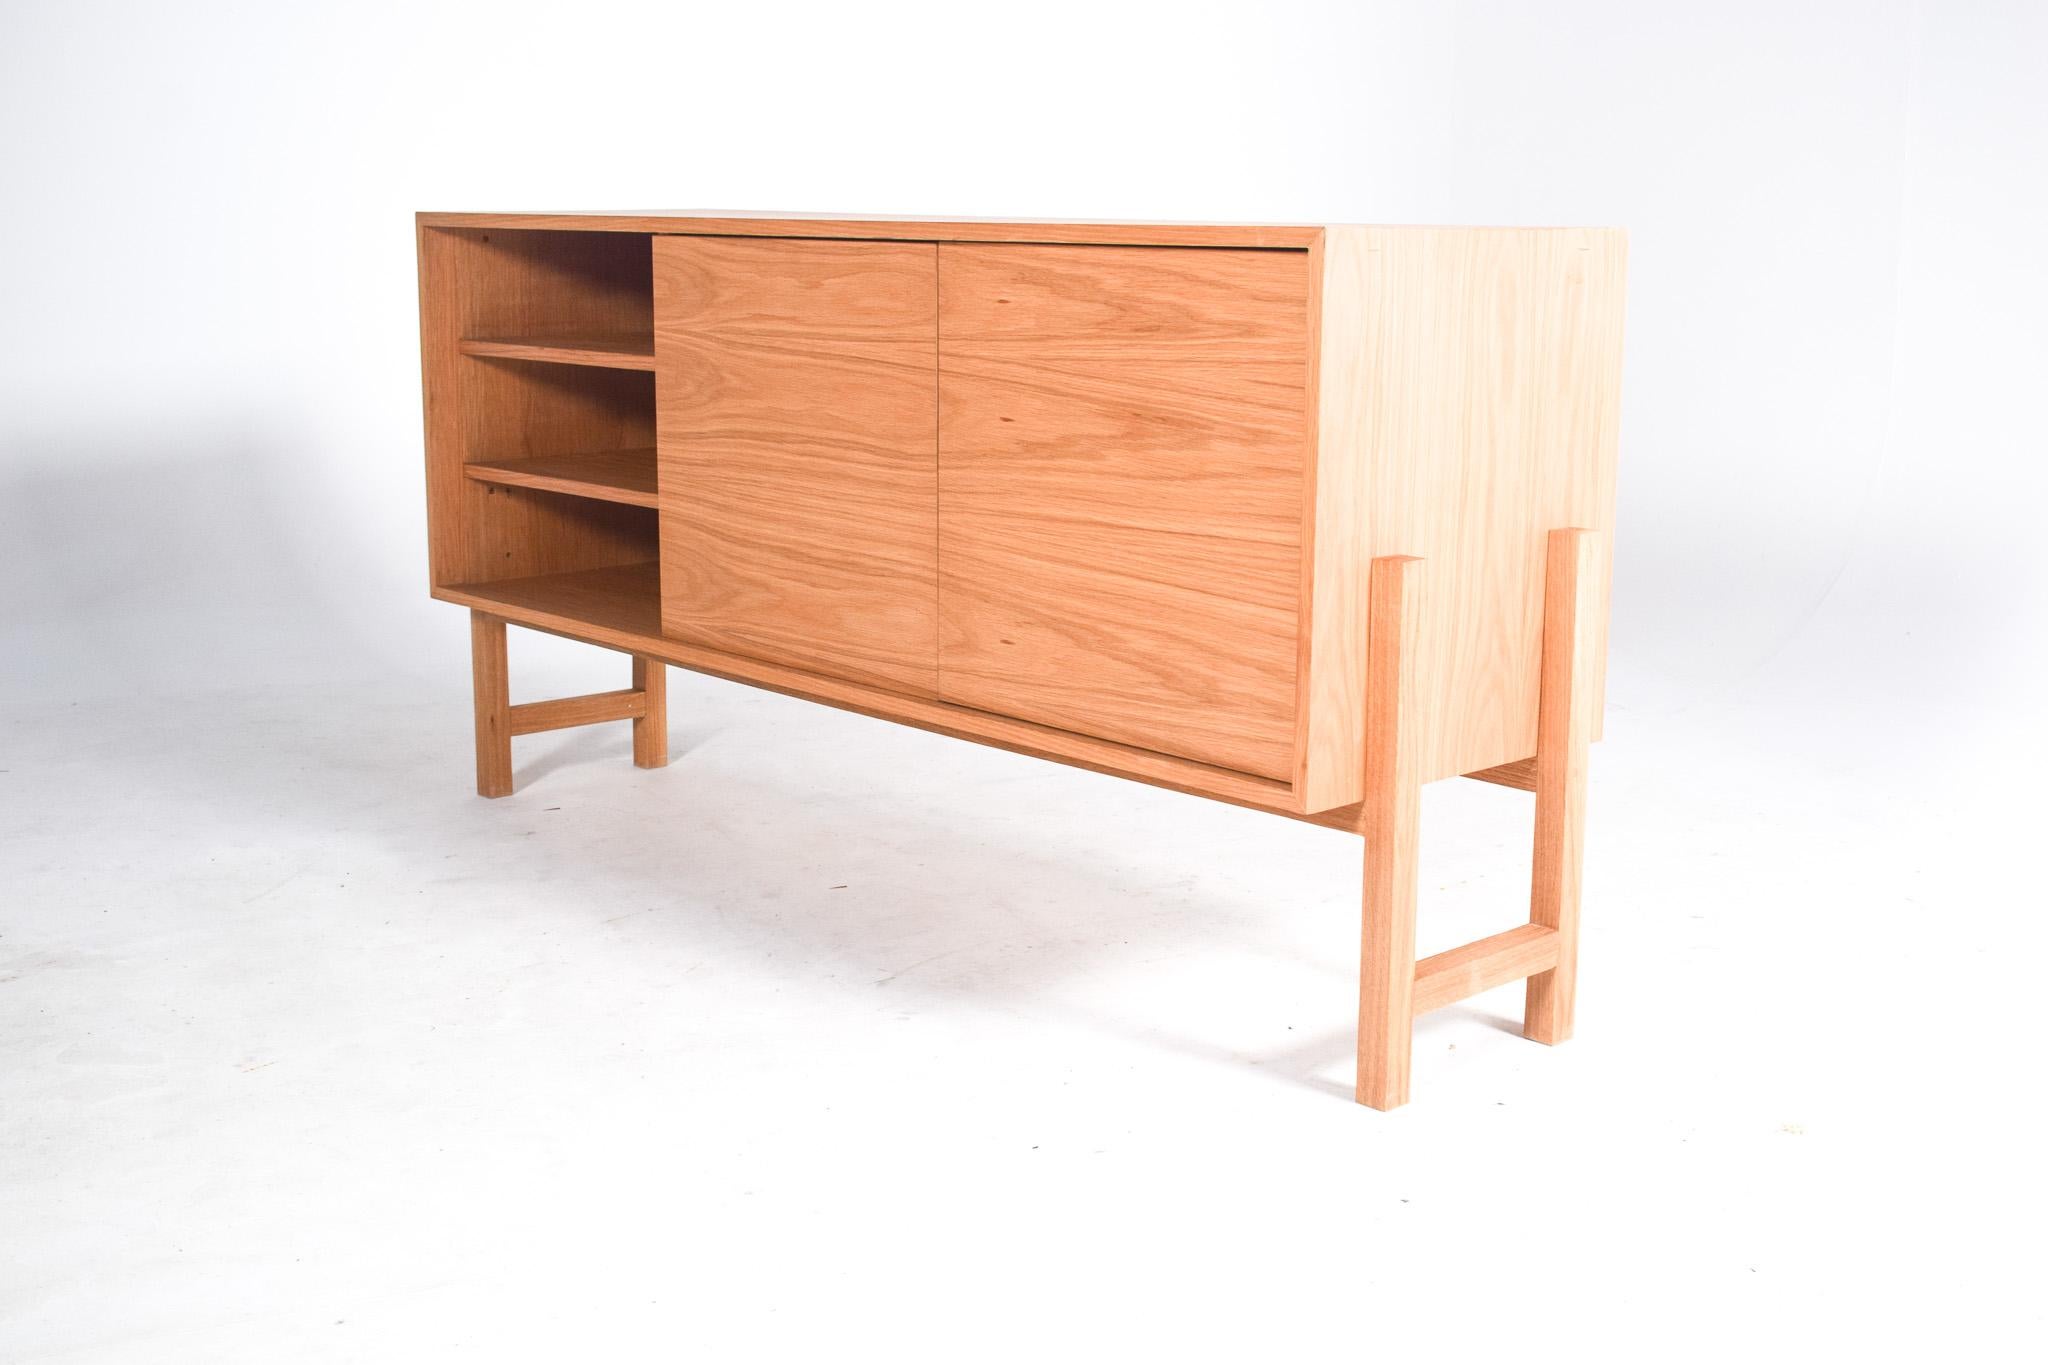 
This modern oak sideboard features a clean and minimalist design that complements a contemporary interior space. The sideboard stands on four sturdy legs that elevate it off the ground, adding to its elegant profile. Its construction boasts a fine